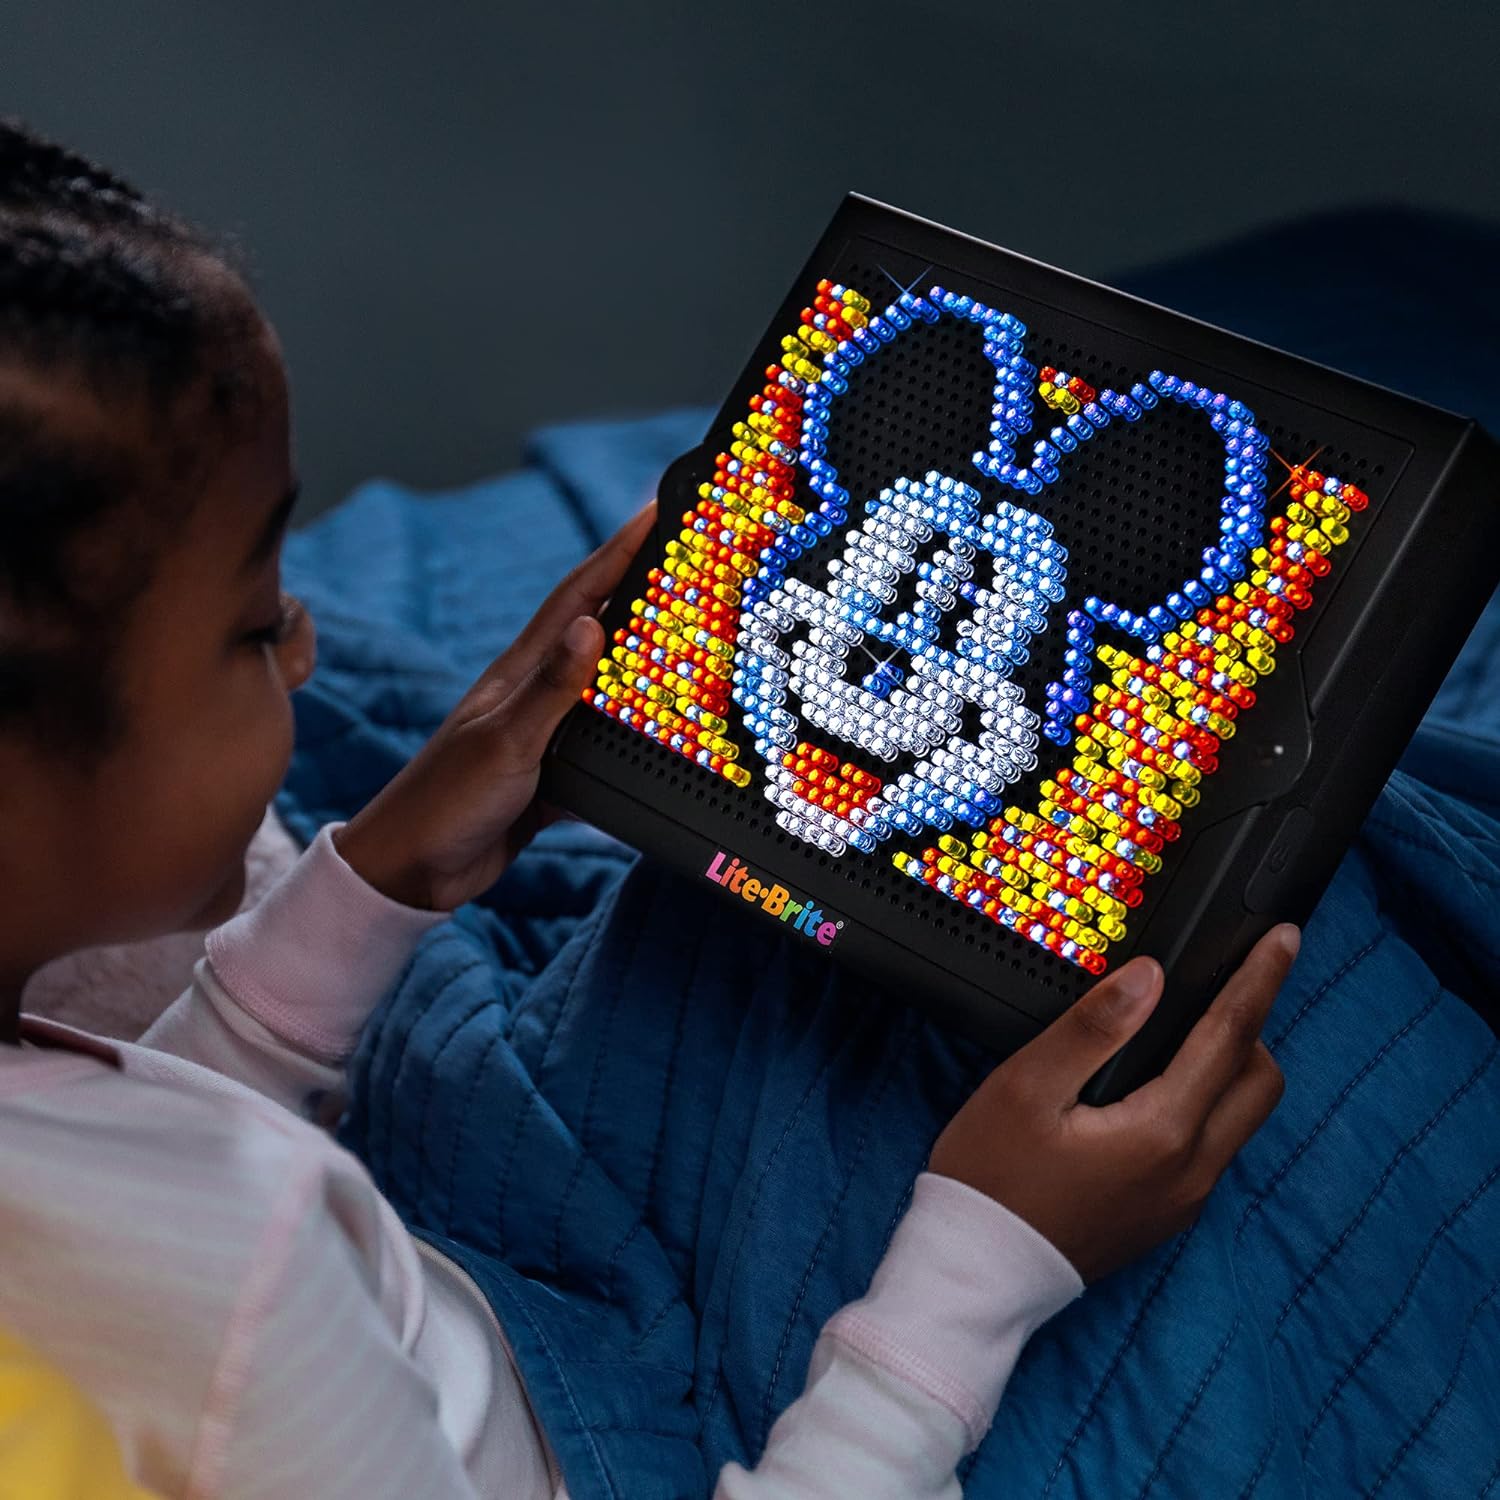 Lite-Brite Super Bright HD - Disney 100 Years of Wonder Edition Educational Play for Children – Enhances Creativity & Fine Motor Skills, Gift for Boys and Girls Ages 6+